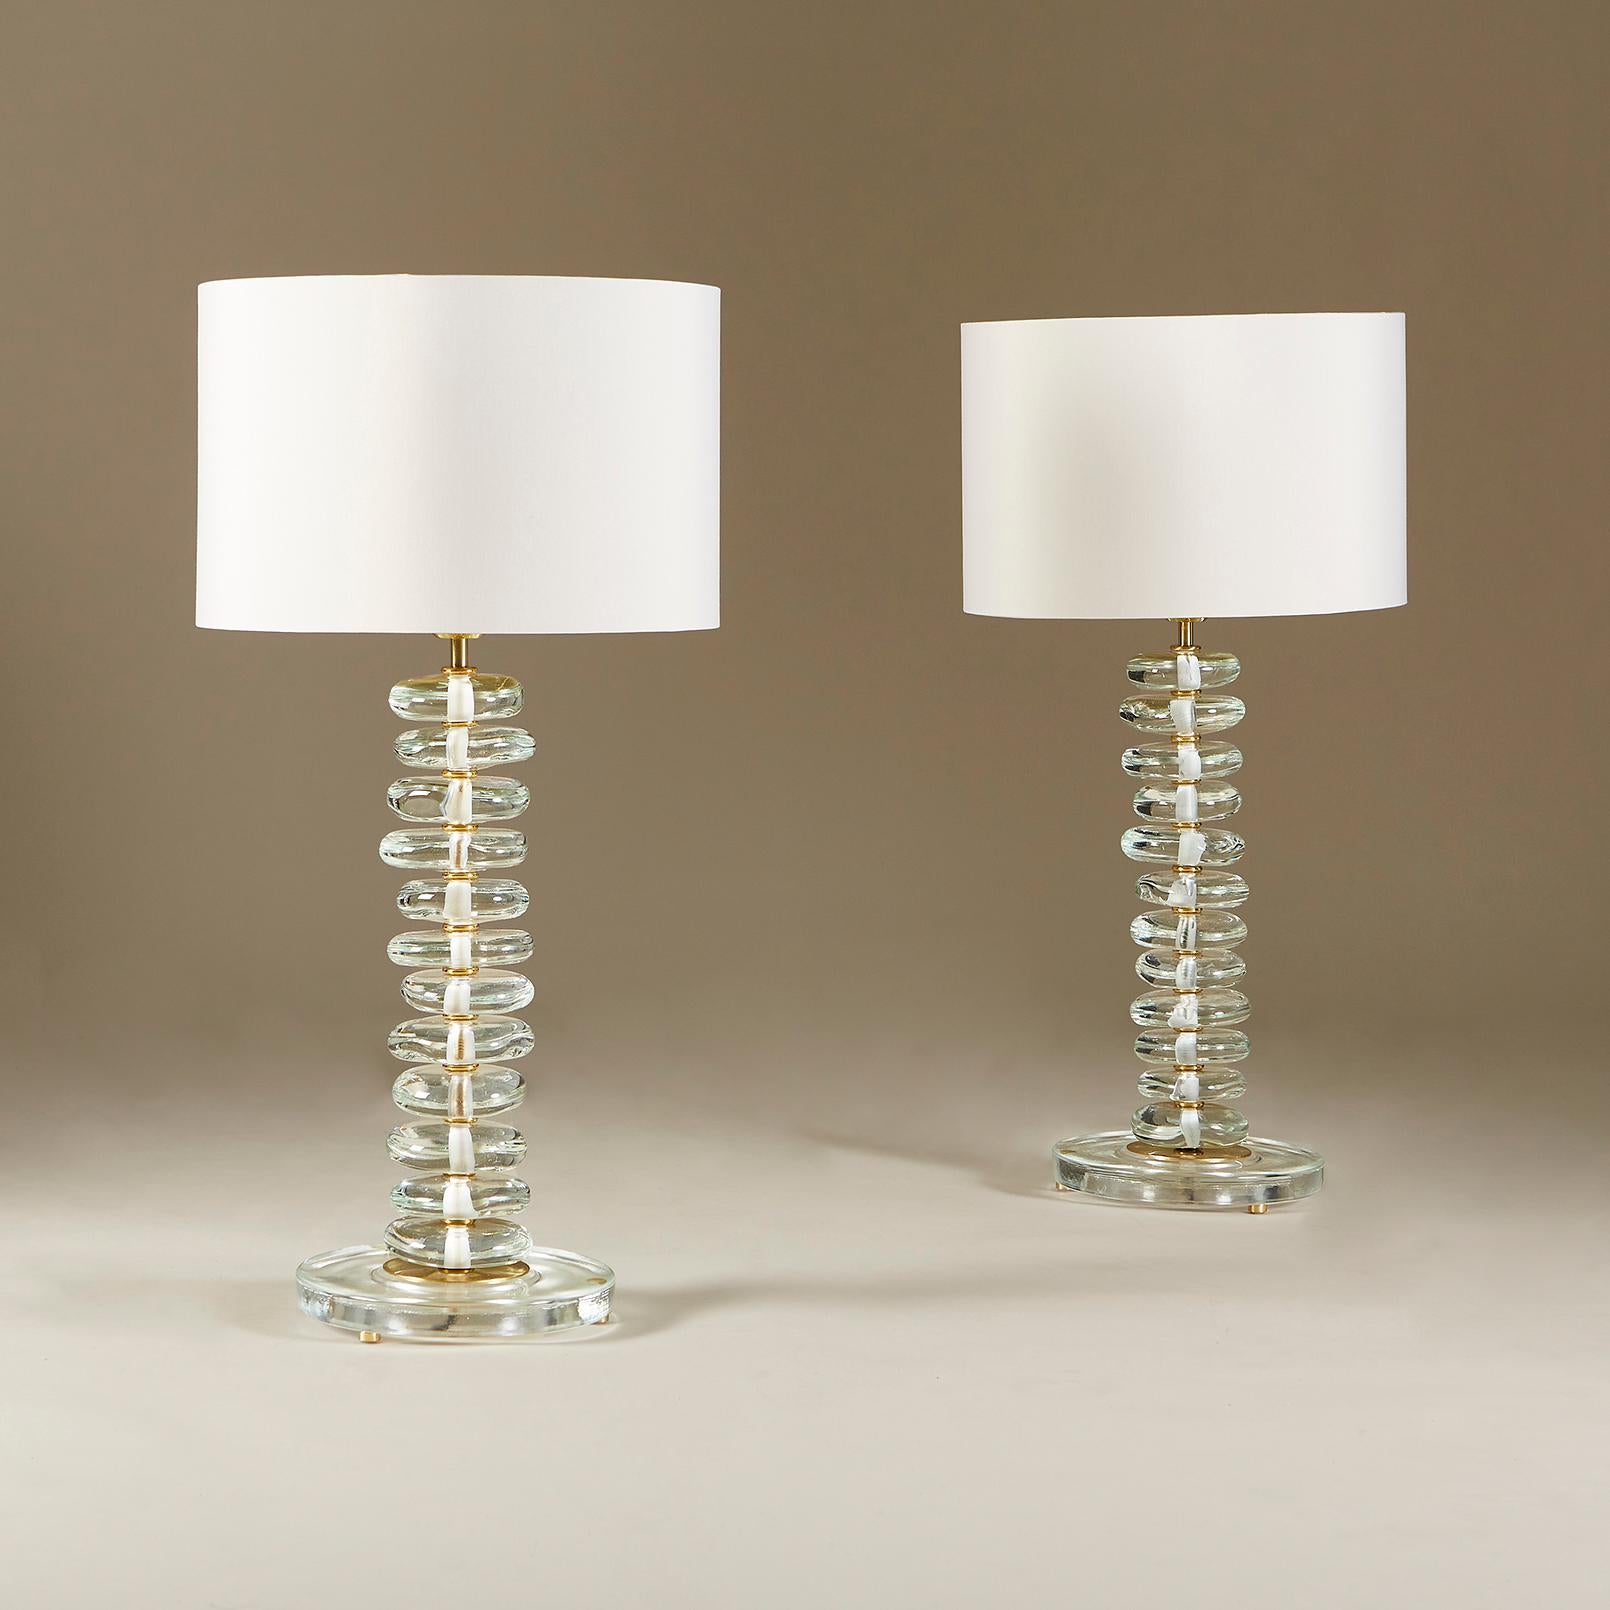 Tall contemporary table lamps composed of pillars of individually-shaped glass pebbles standing on circular glass bases with brass detailing.

The dimensions below are those of each lamp only. Measure: The shades are 10 inches high.